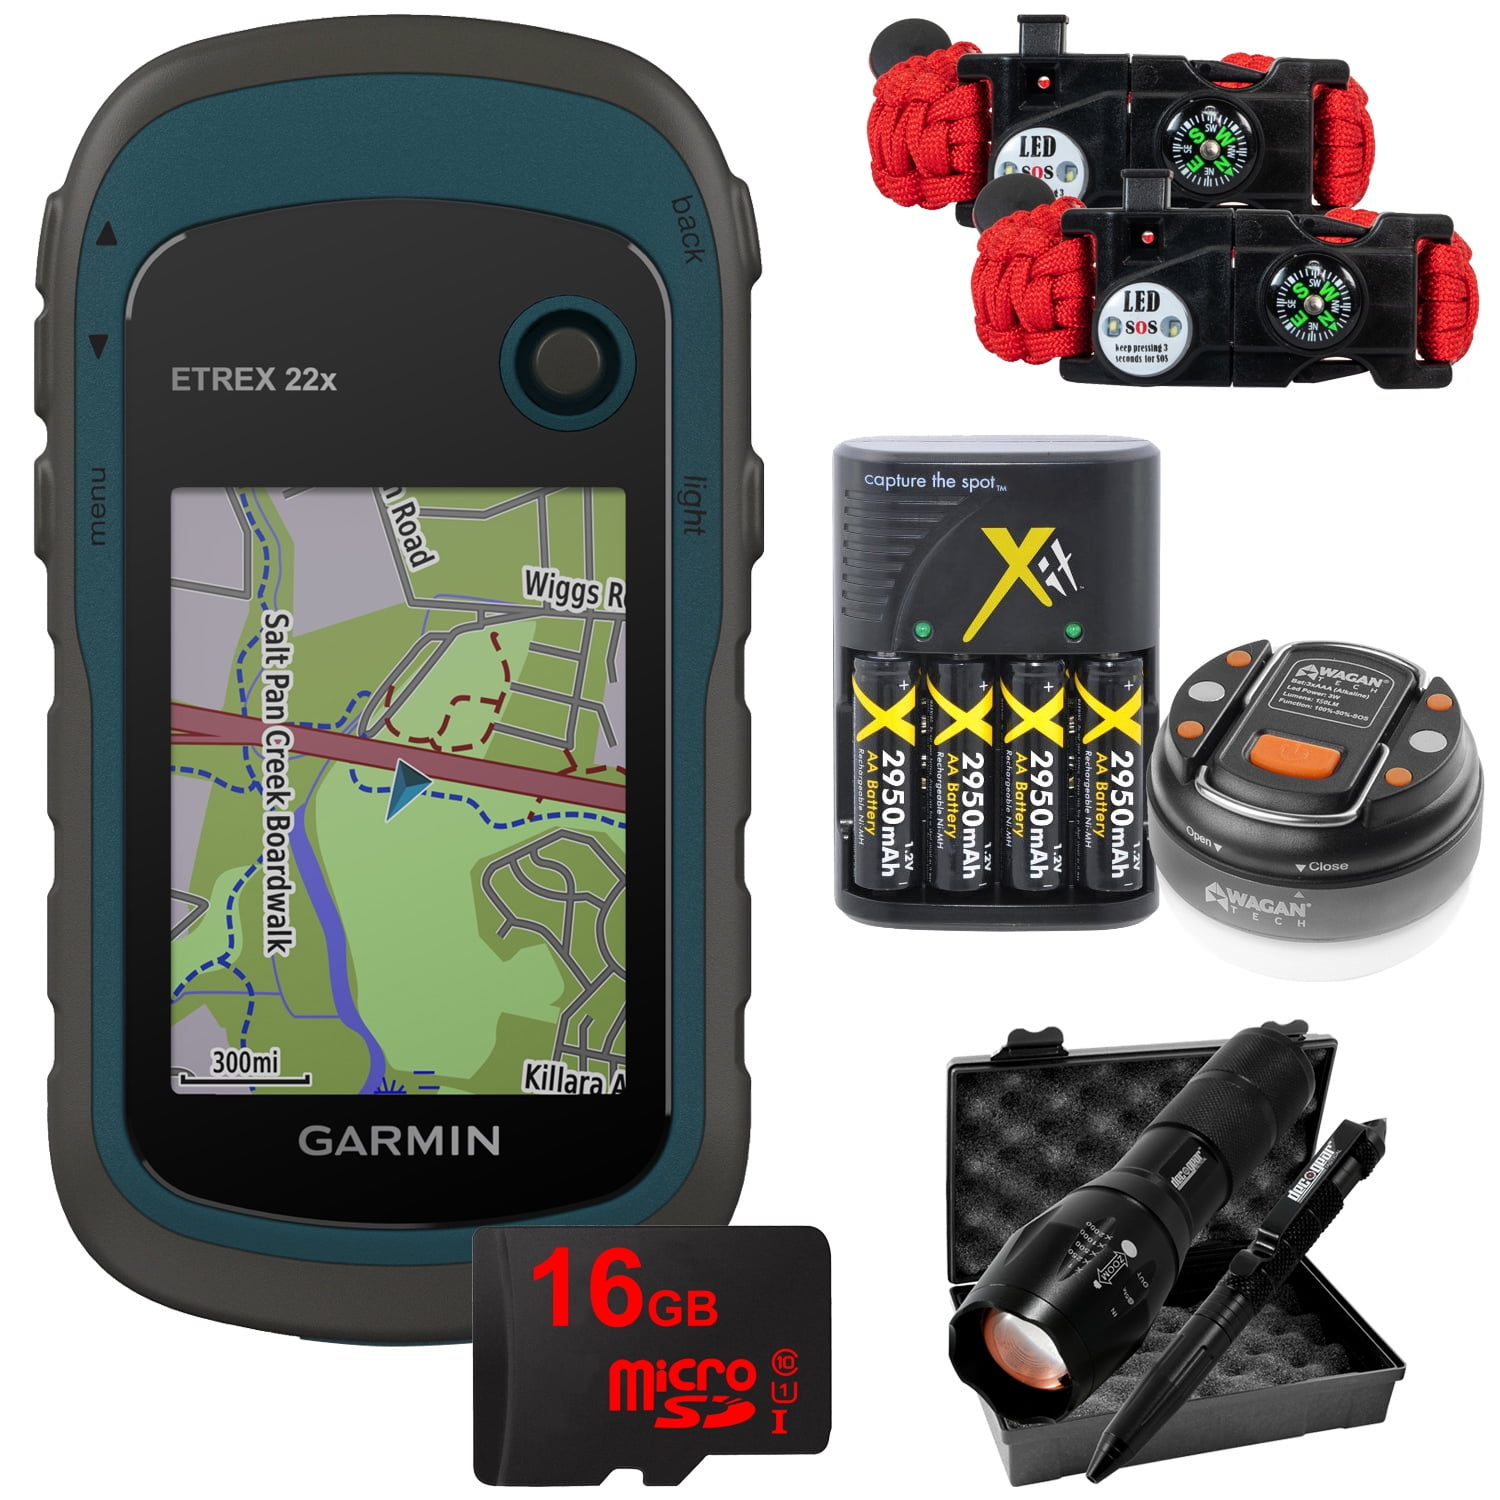 Garmin eTrex 32x GPS - Review and overview of this outdoor GPS unit 